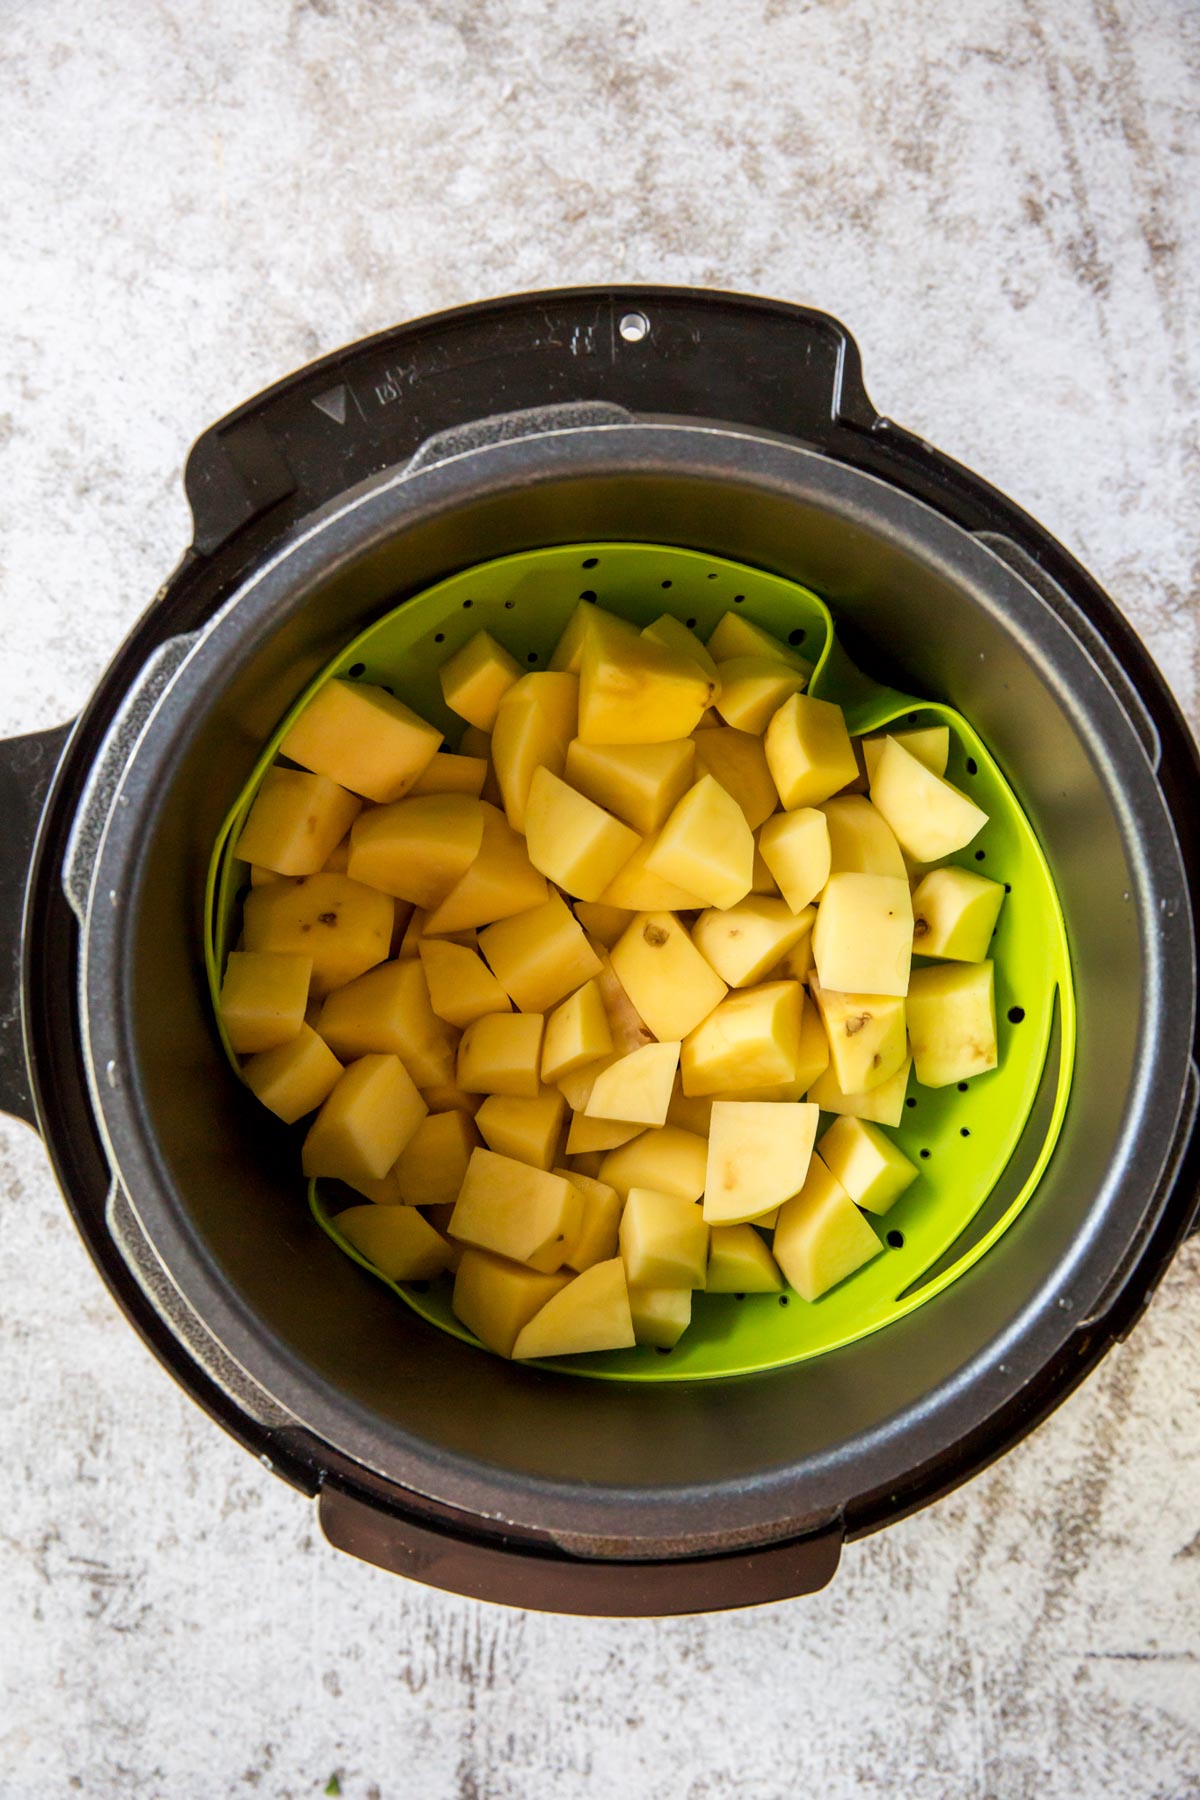 instant pot, chopped potatoes, green silicone basket